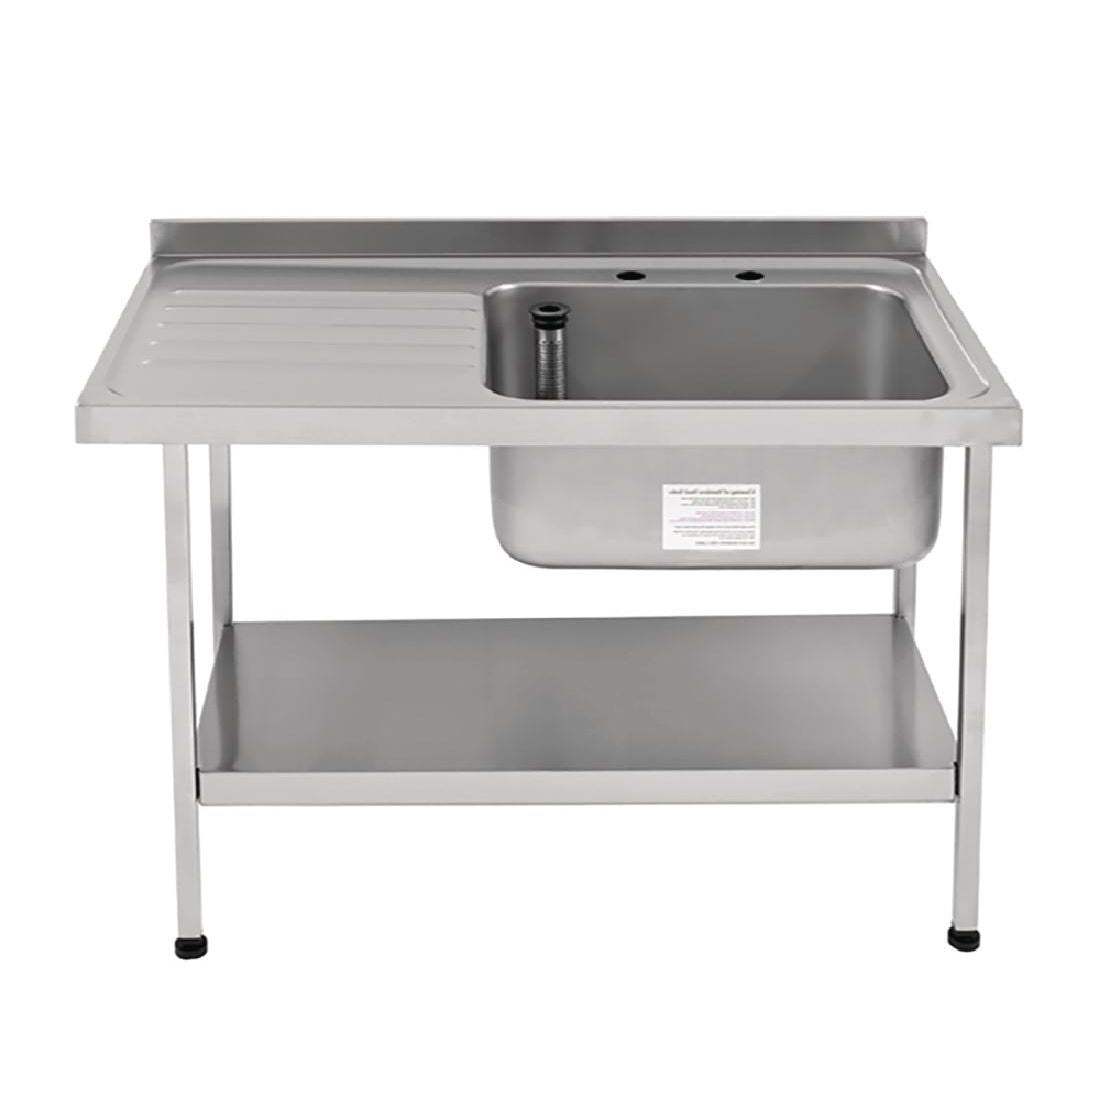 Franke Self Assembly Stainless Steel Sink Right Hand Bowl 1500x 650mm - P368